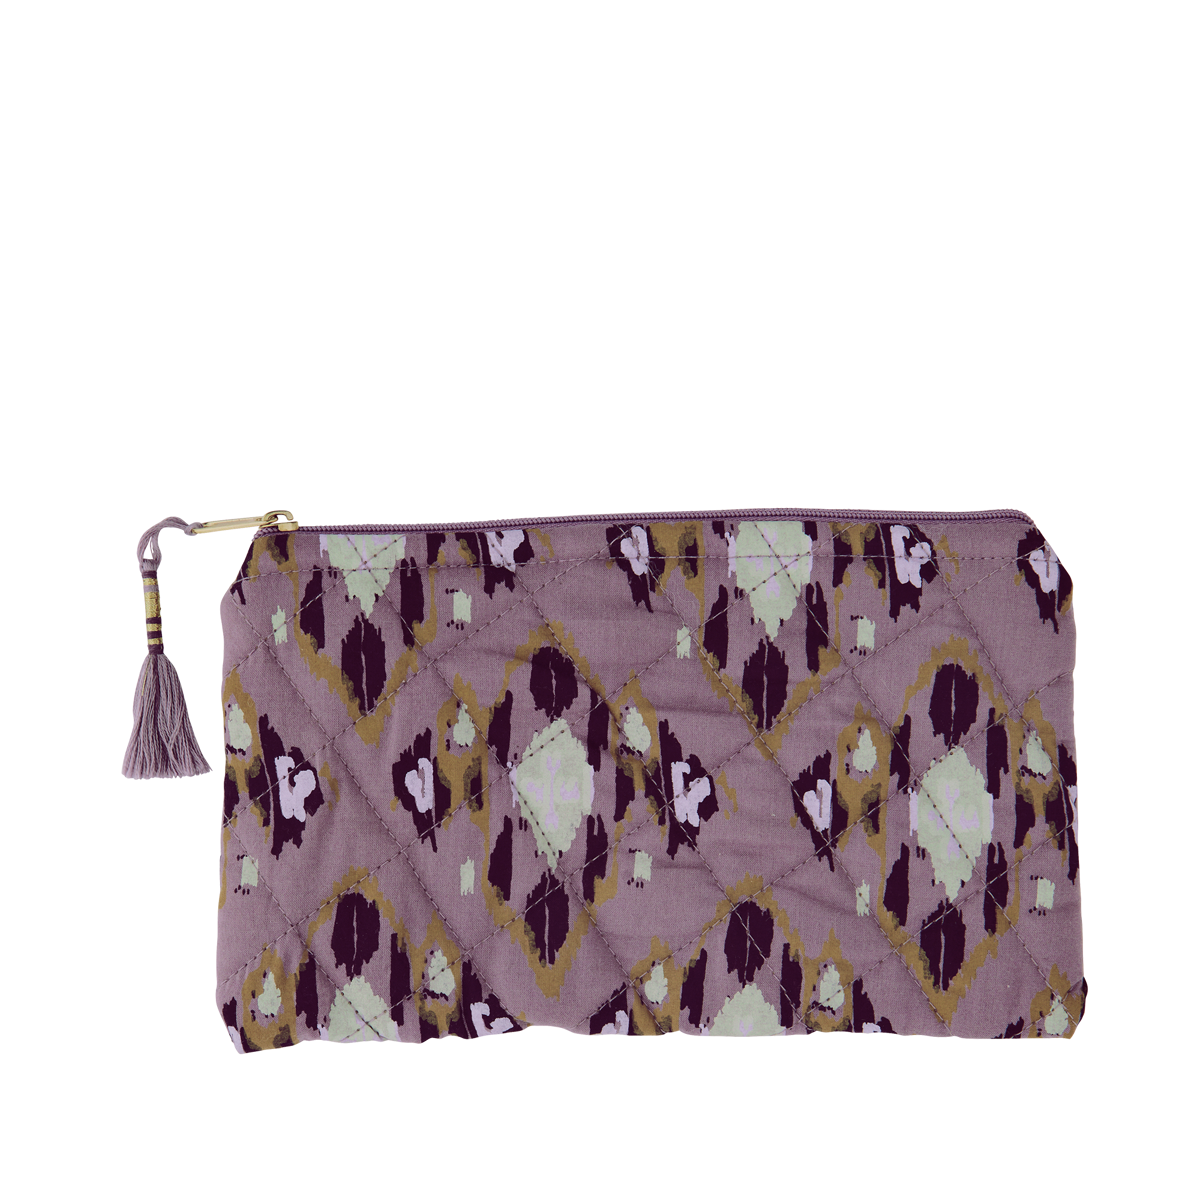 Quilted cotton pouch